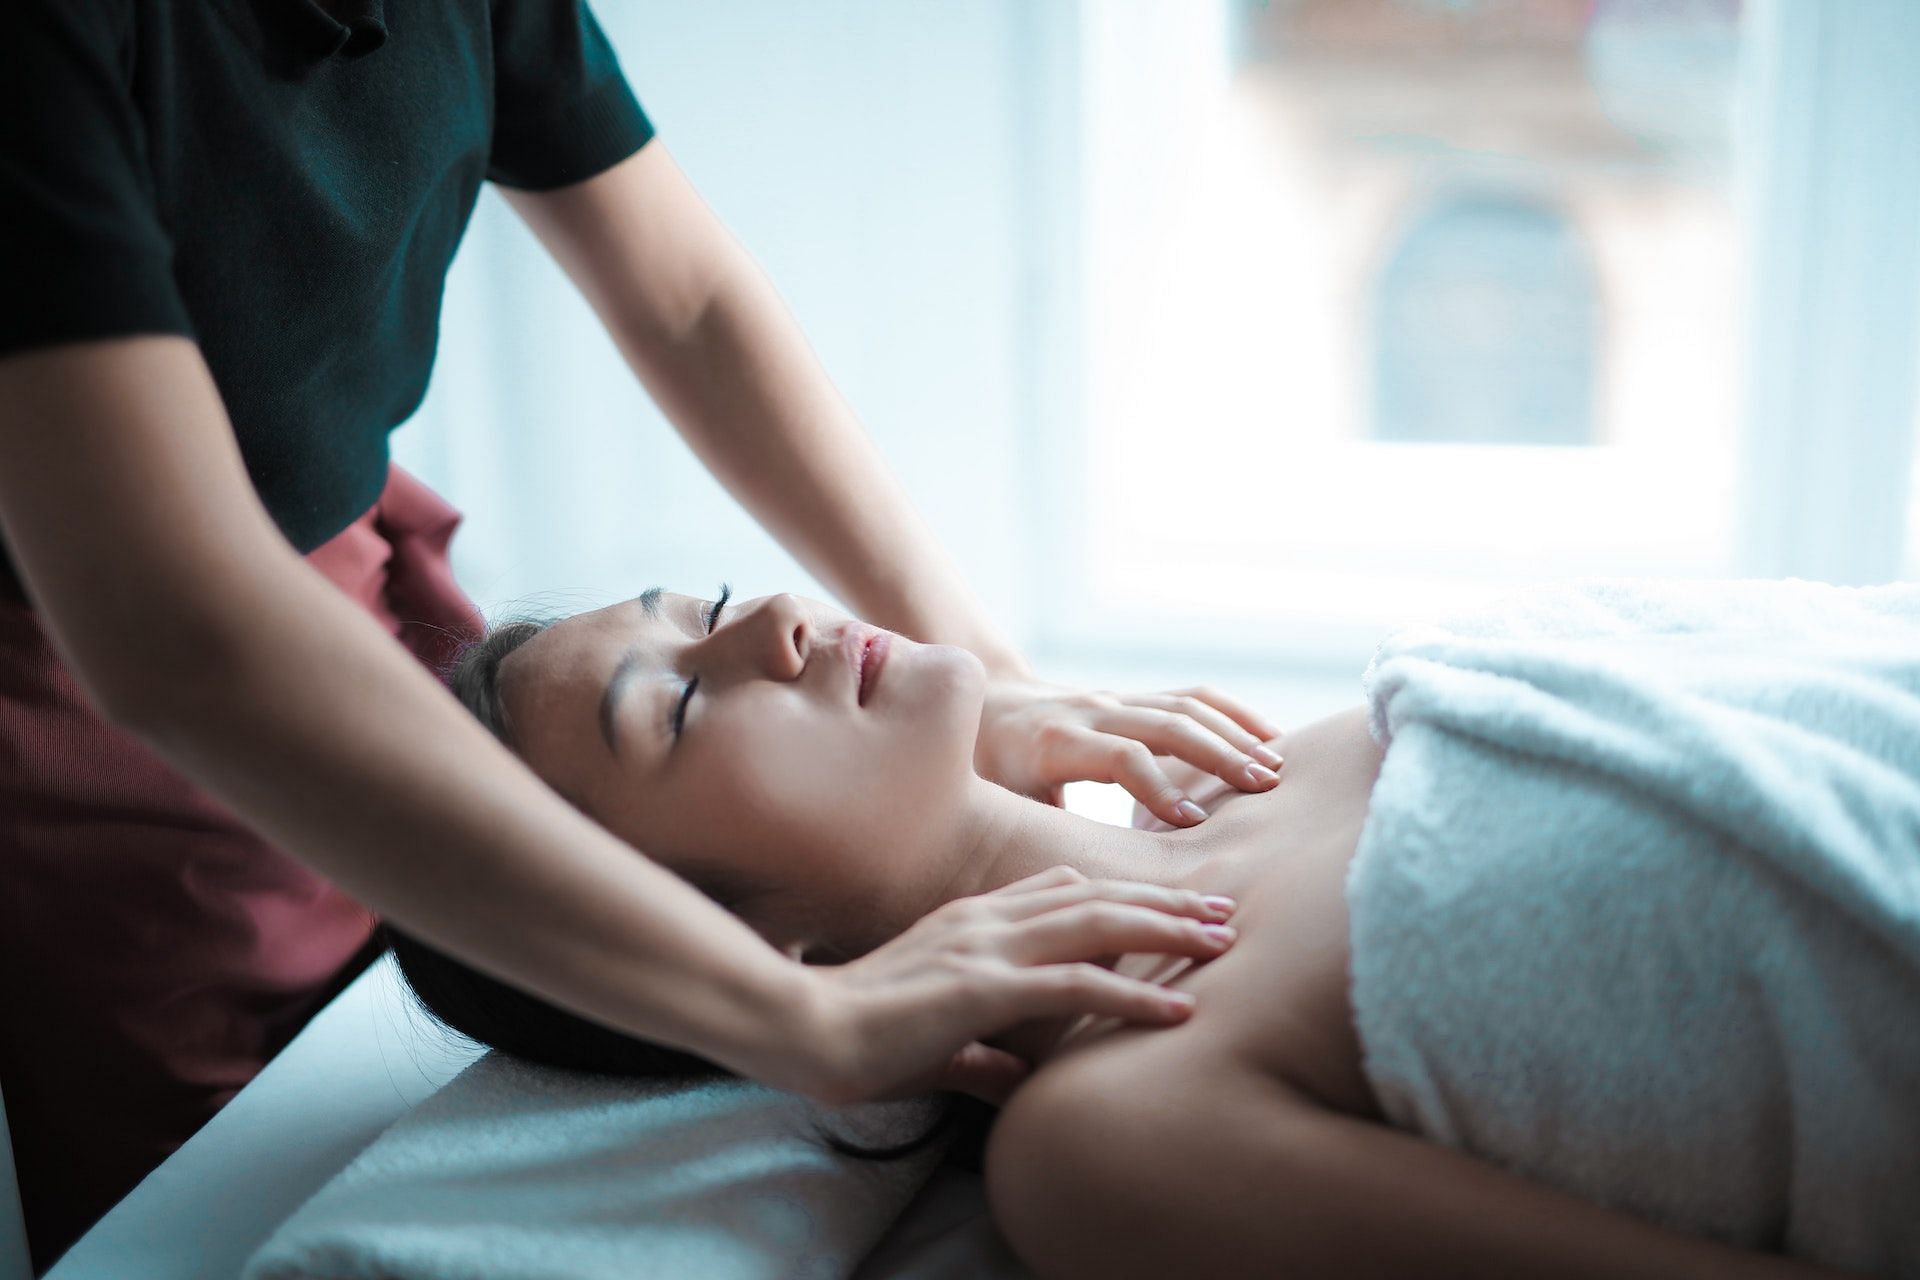 The benefits of deep tissue massage include easing stress and anxiety. (Image via Pexels/Andrea Piacquadio)